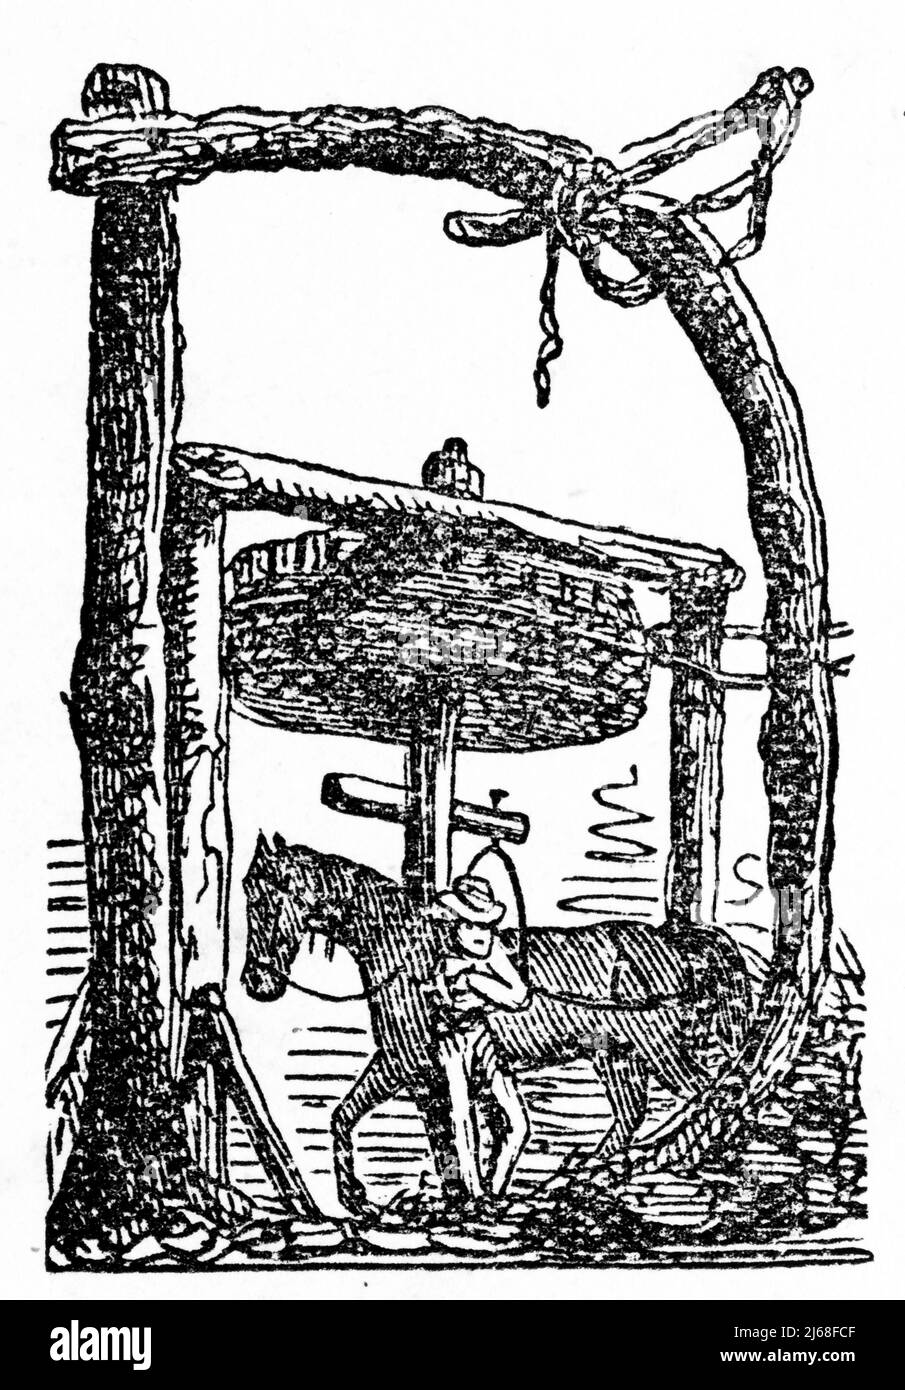 Engraving of embellished letter D from a chapter heading on the history of Ballarat, VIctoria, Australia. the illustration features a wheel used to stir up the paydirt and settle the gold. Stock Photo